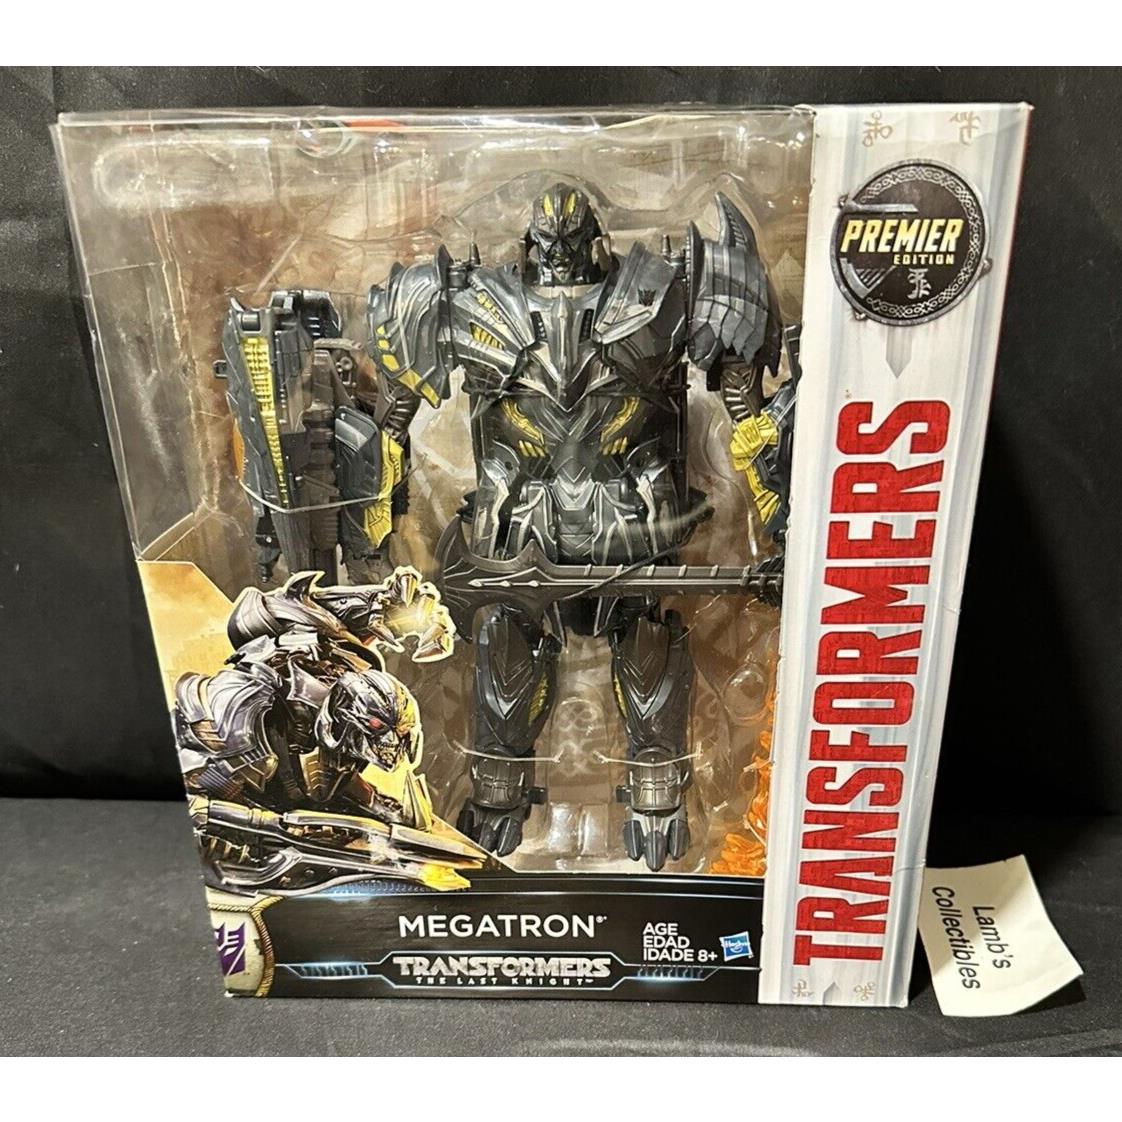 The Last Knight Premier Edition Leader Class 8 Megatron Transformers Hasbro Toy